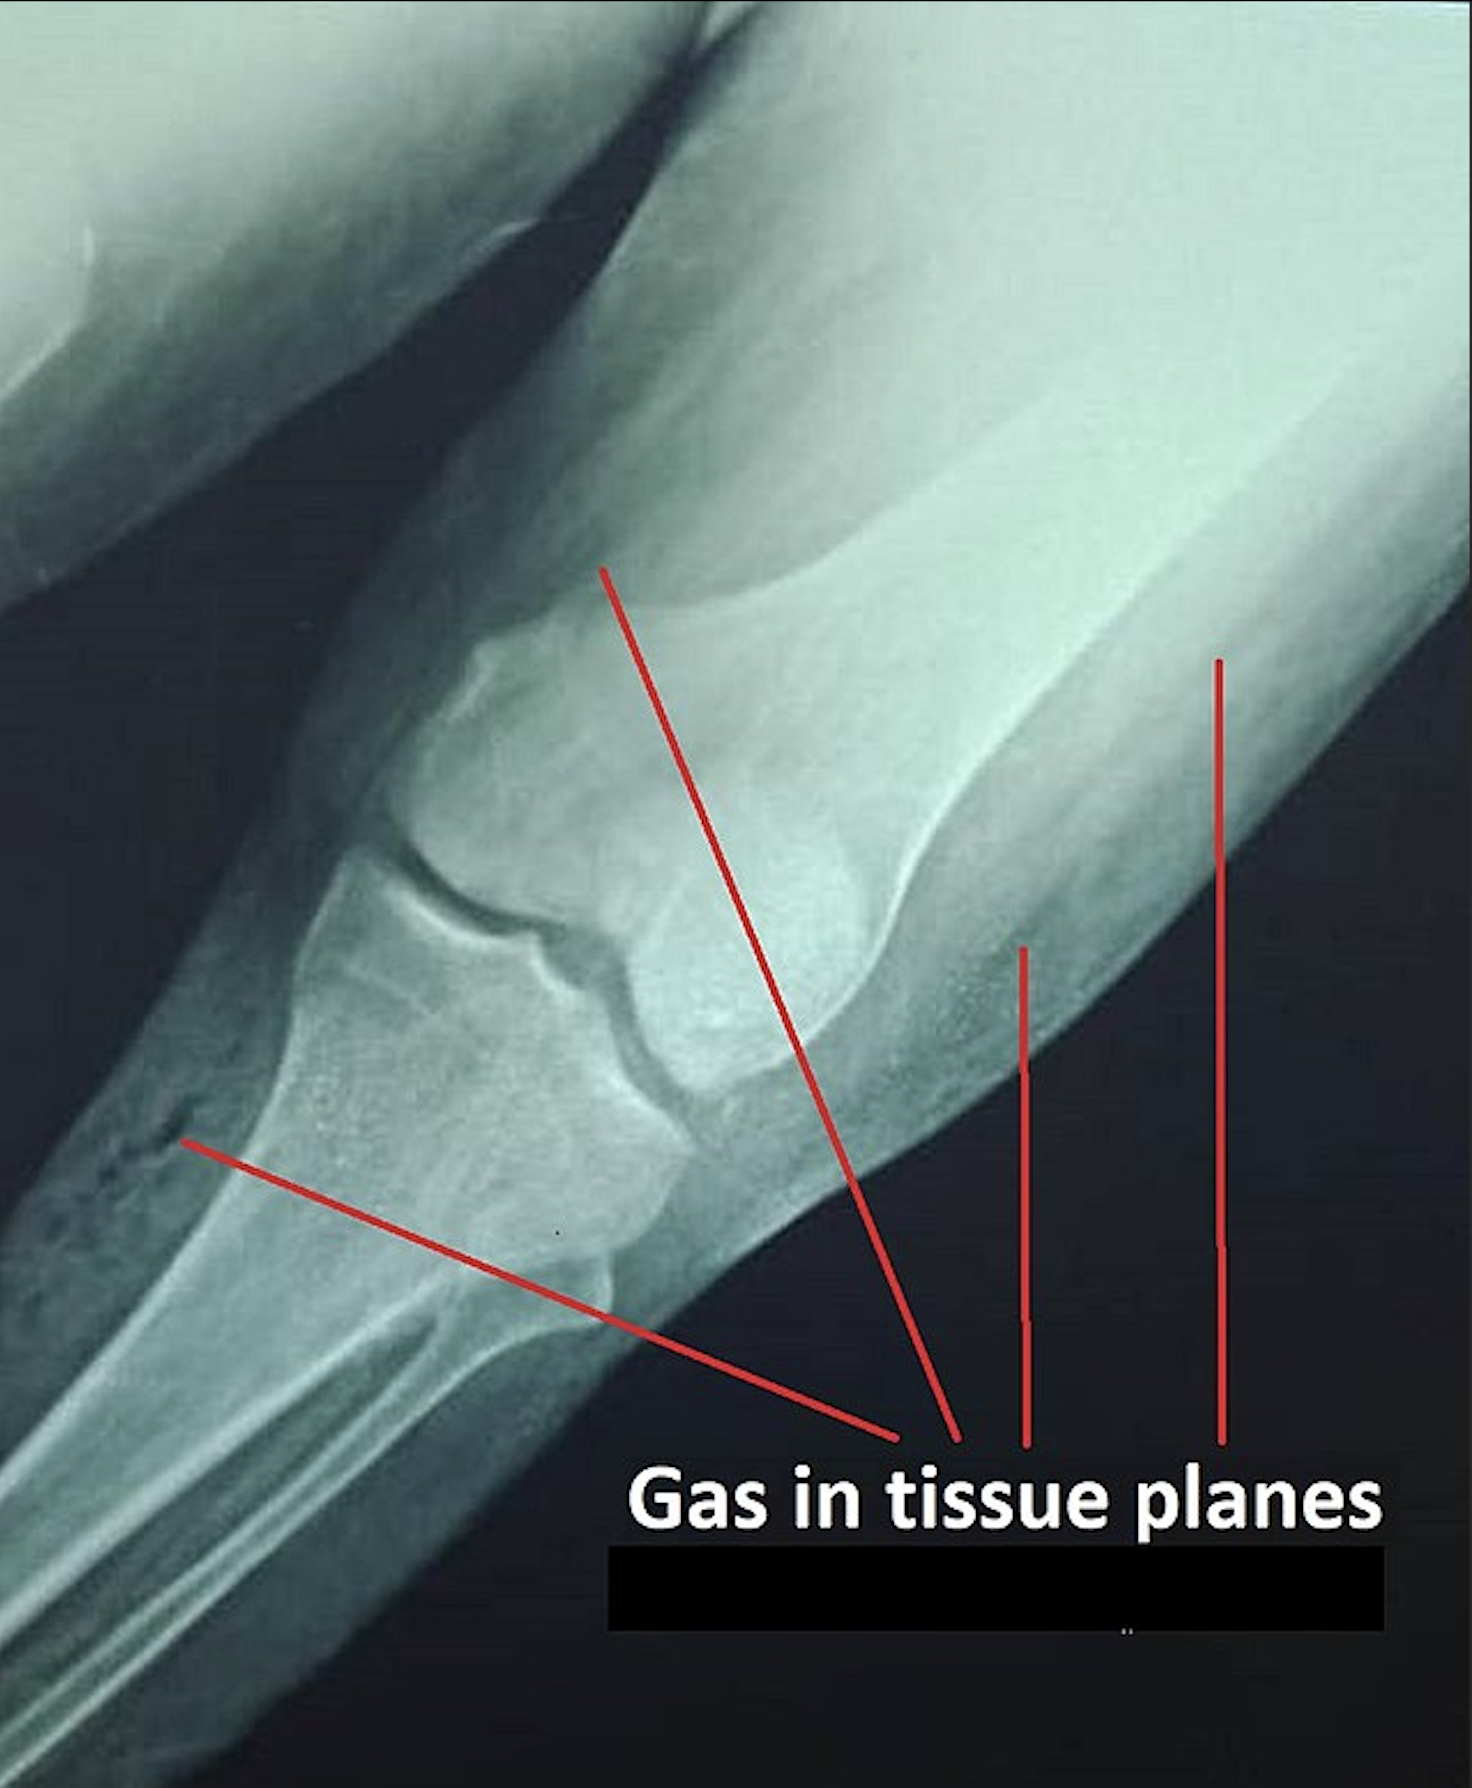 Plain x-ray showing gas in the tissue planes in a patient with gas gangrene.